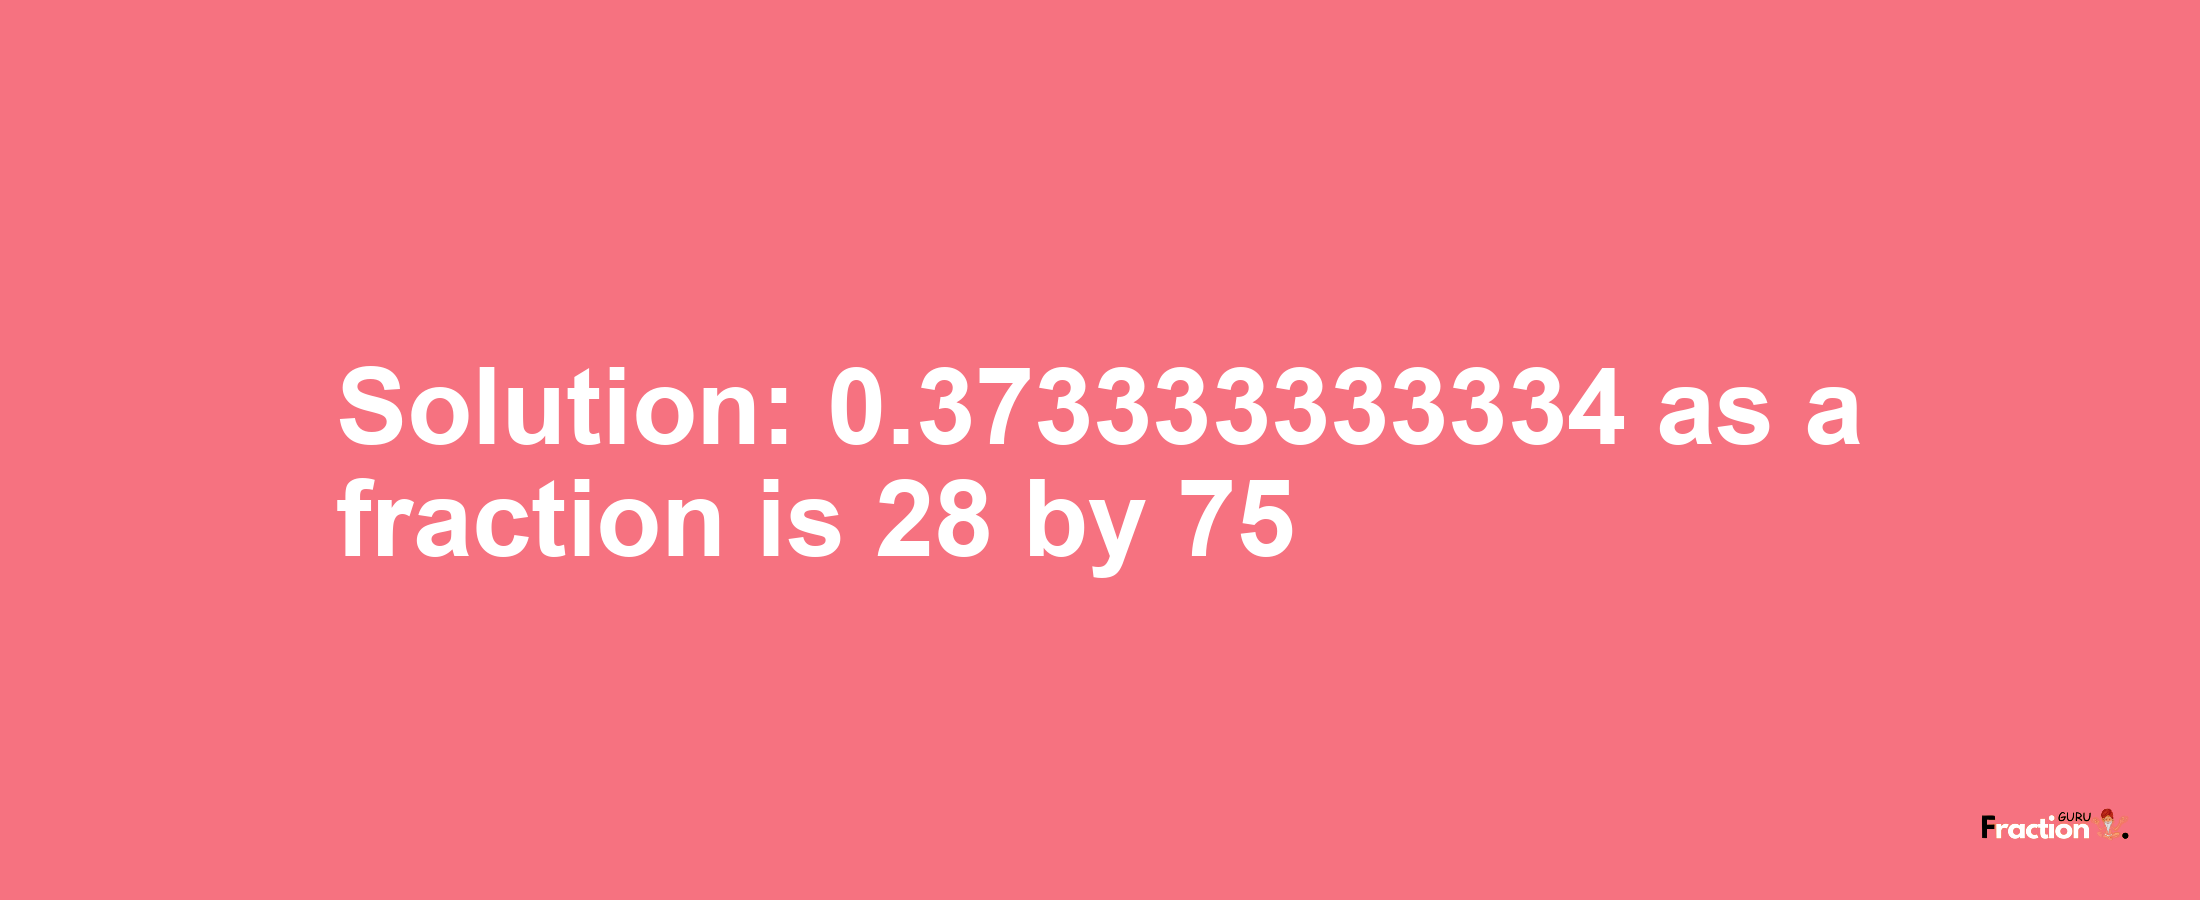 Solution:0.373333333334 as a fraction is 28/75